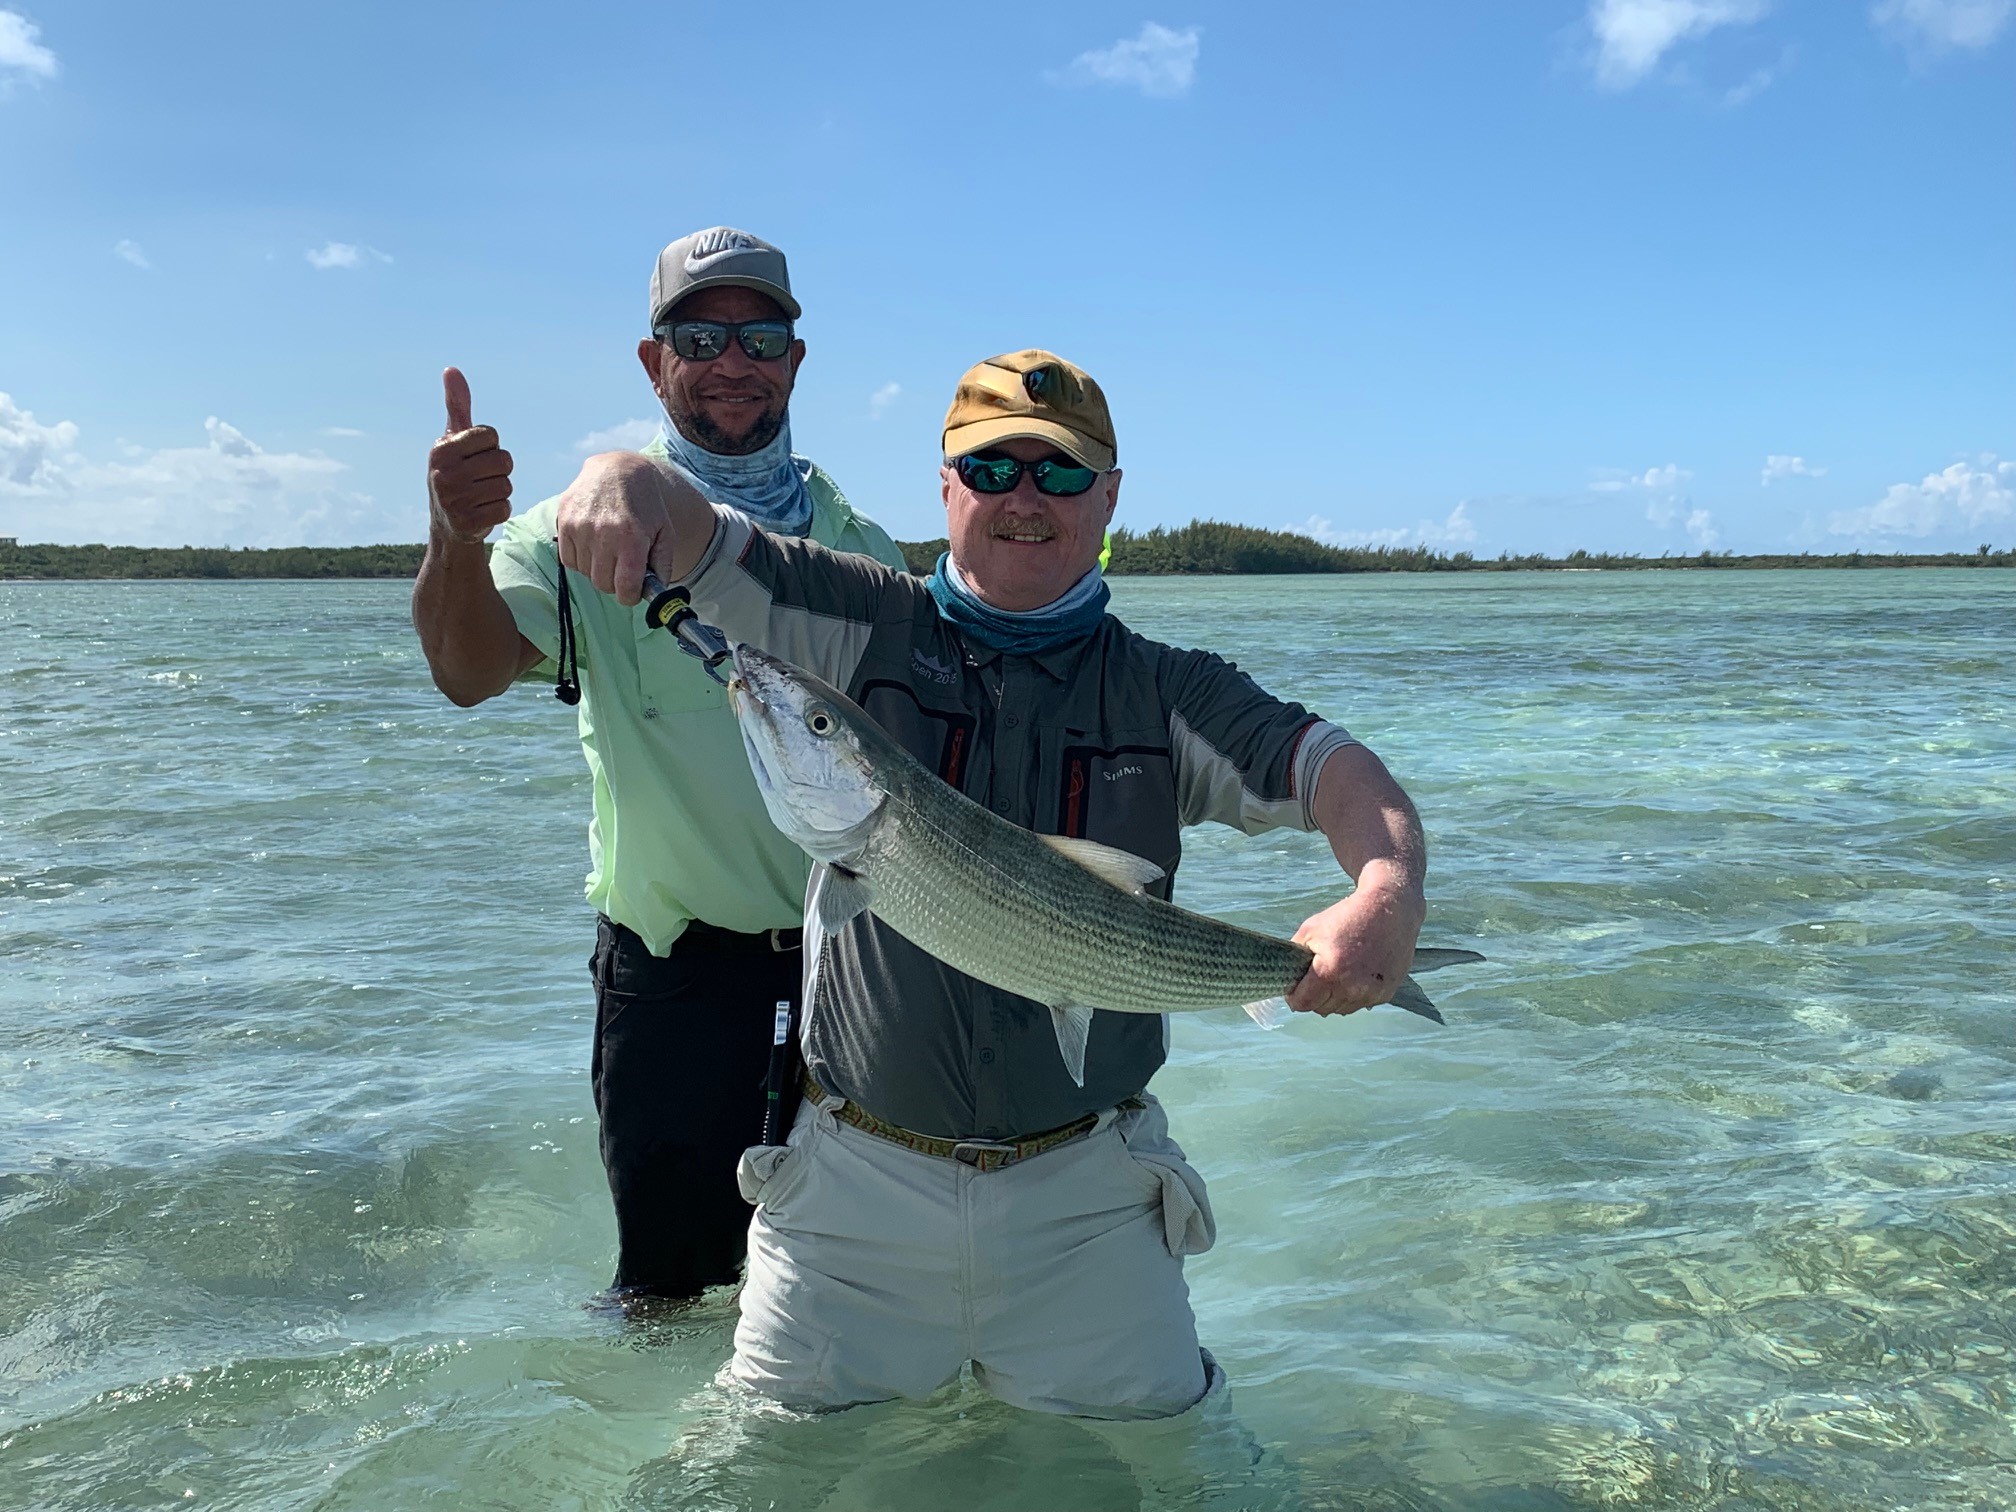 Jon and his bahamas guide showing off a bonefish